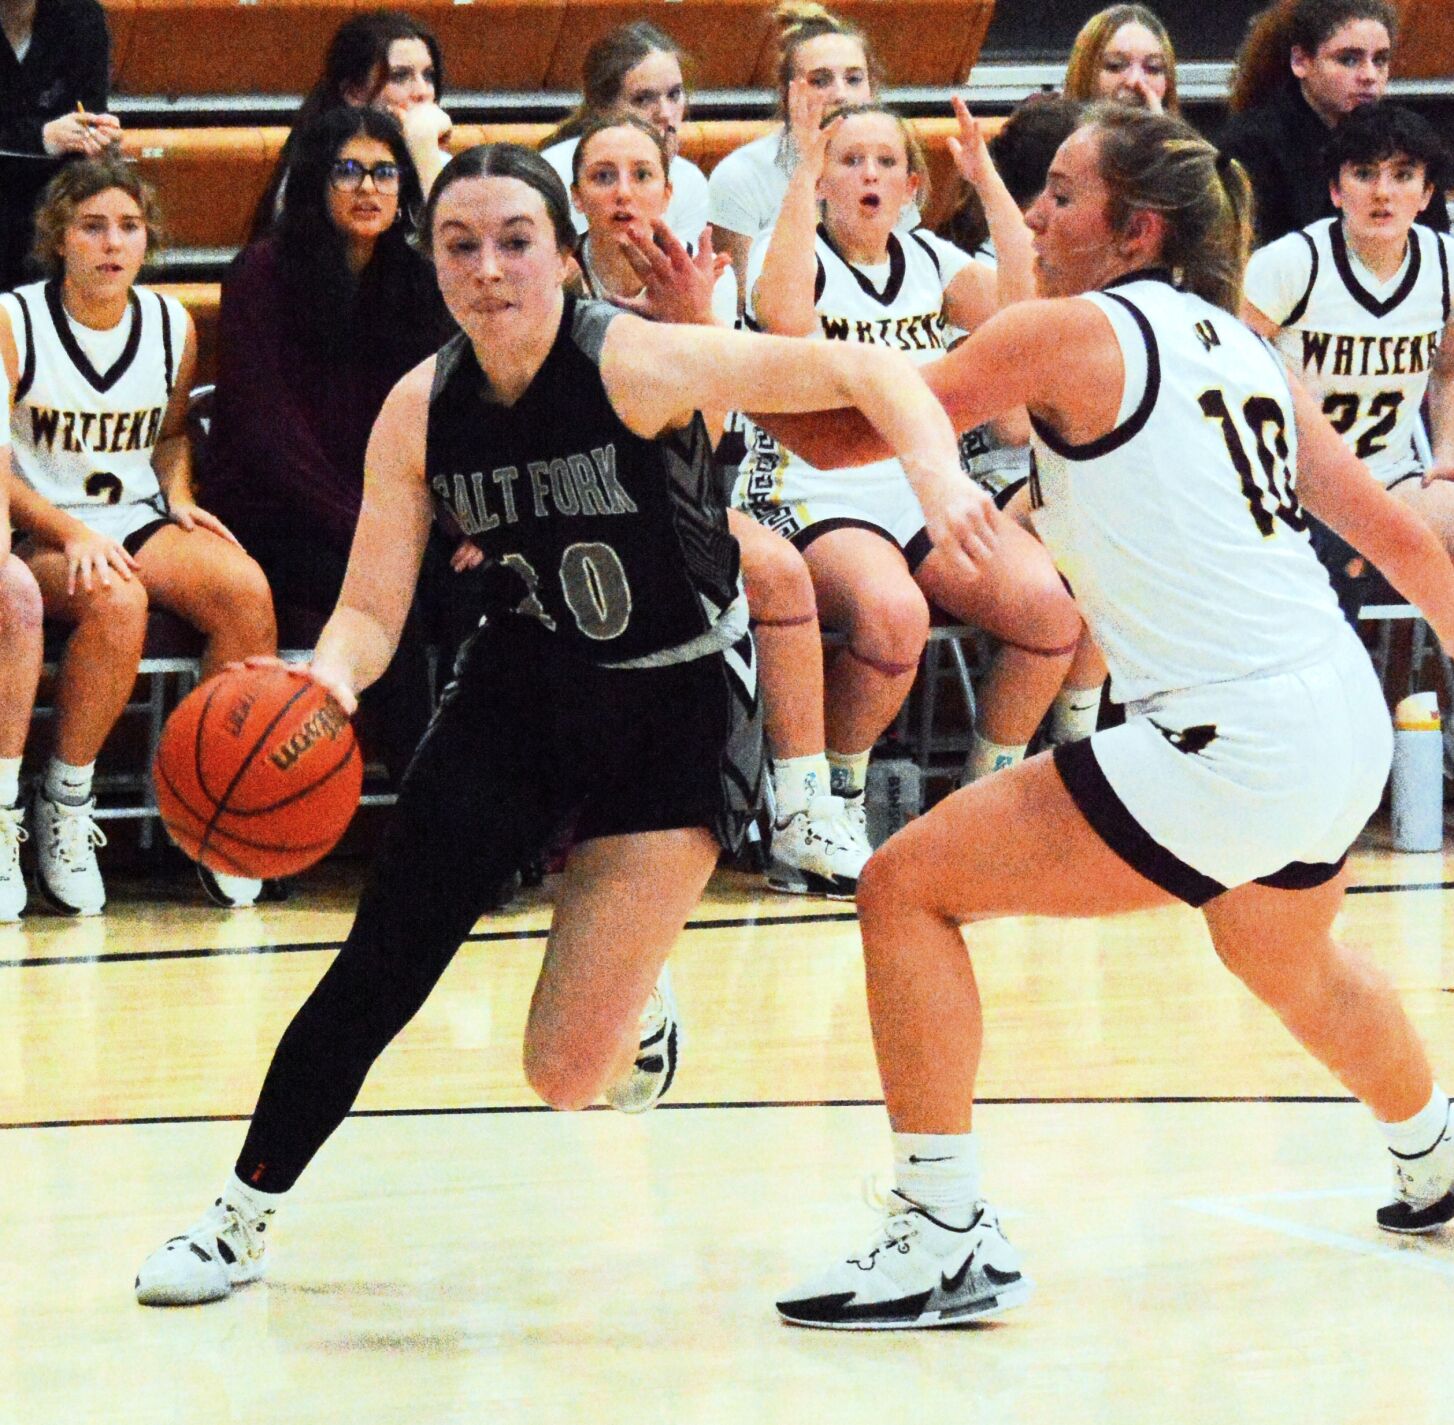 Alexa Jamison: Two-Time All-State Performer Leads Salt Fork to Victory Over Watseka